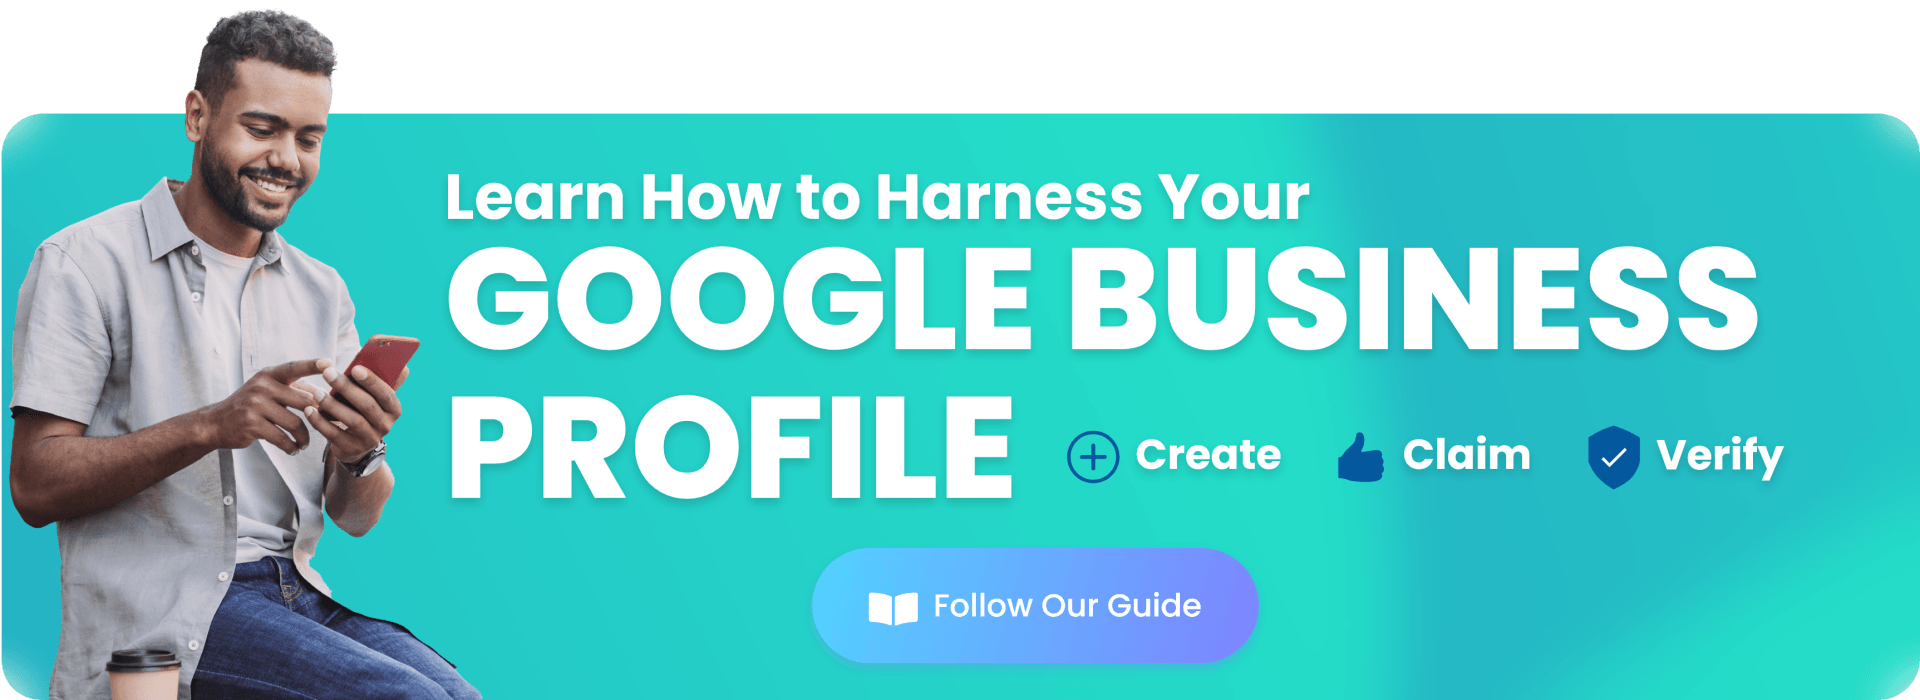 Learn How to Harness Your Google Business Profile